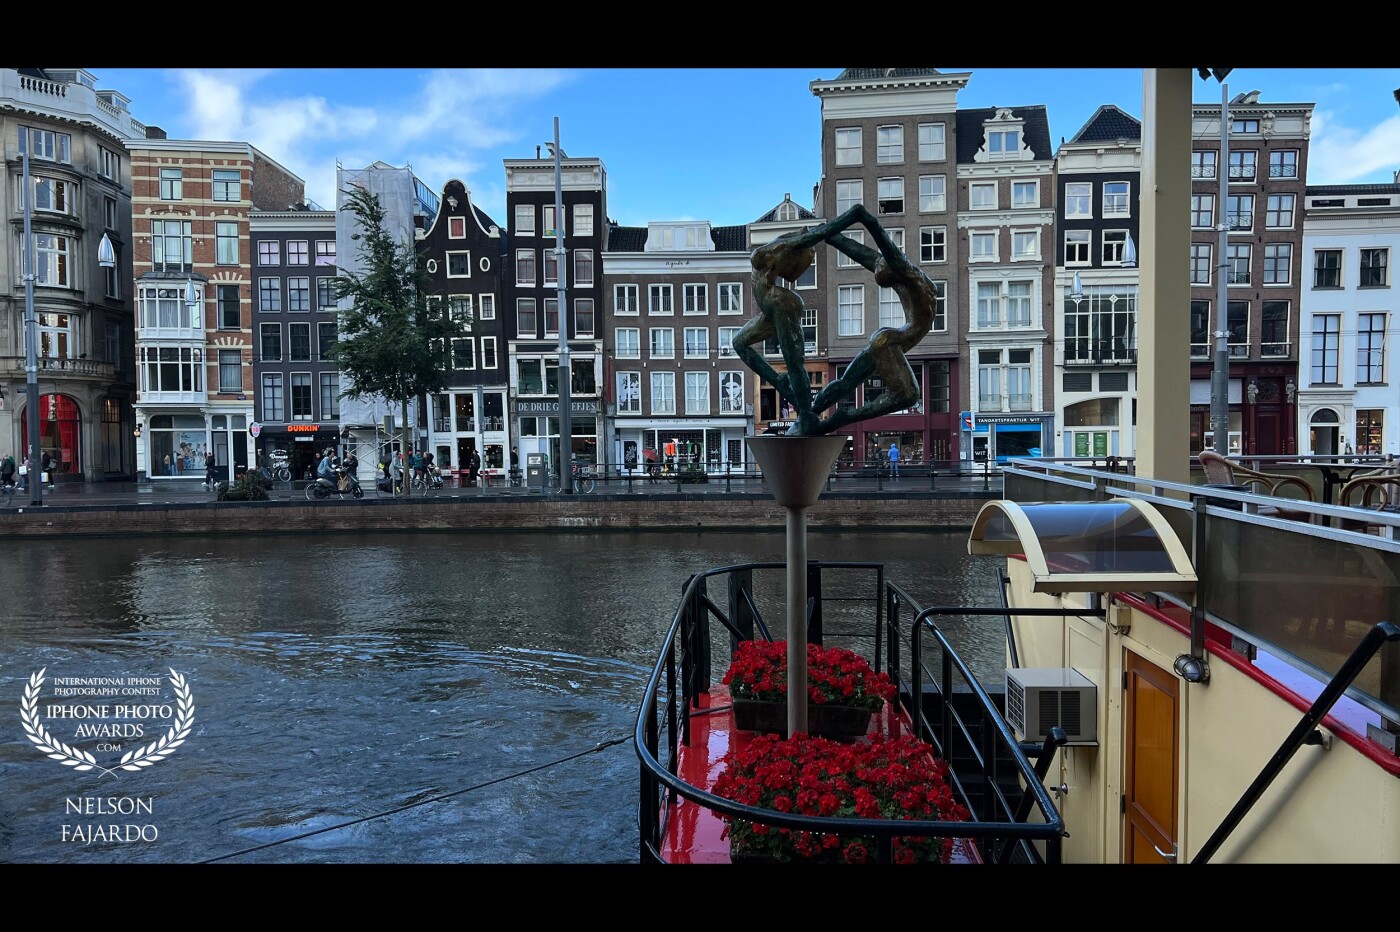 Amsterdam’s dancing lady houses and a dancing ladies sculpture art work located by the river fronting a museum and a river boat ride.